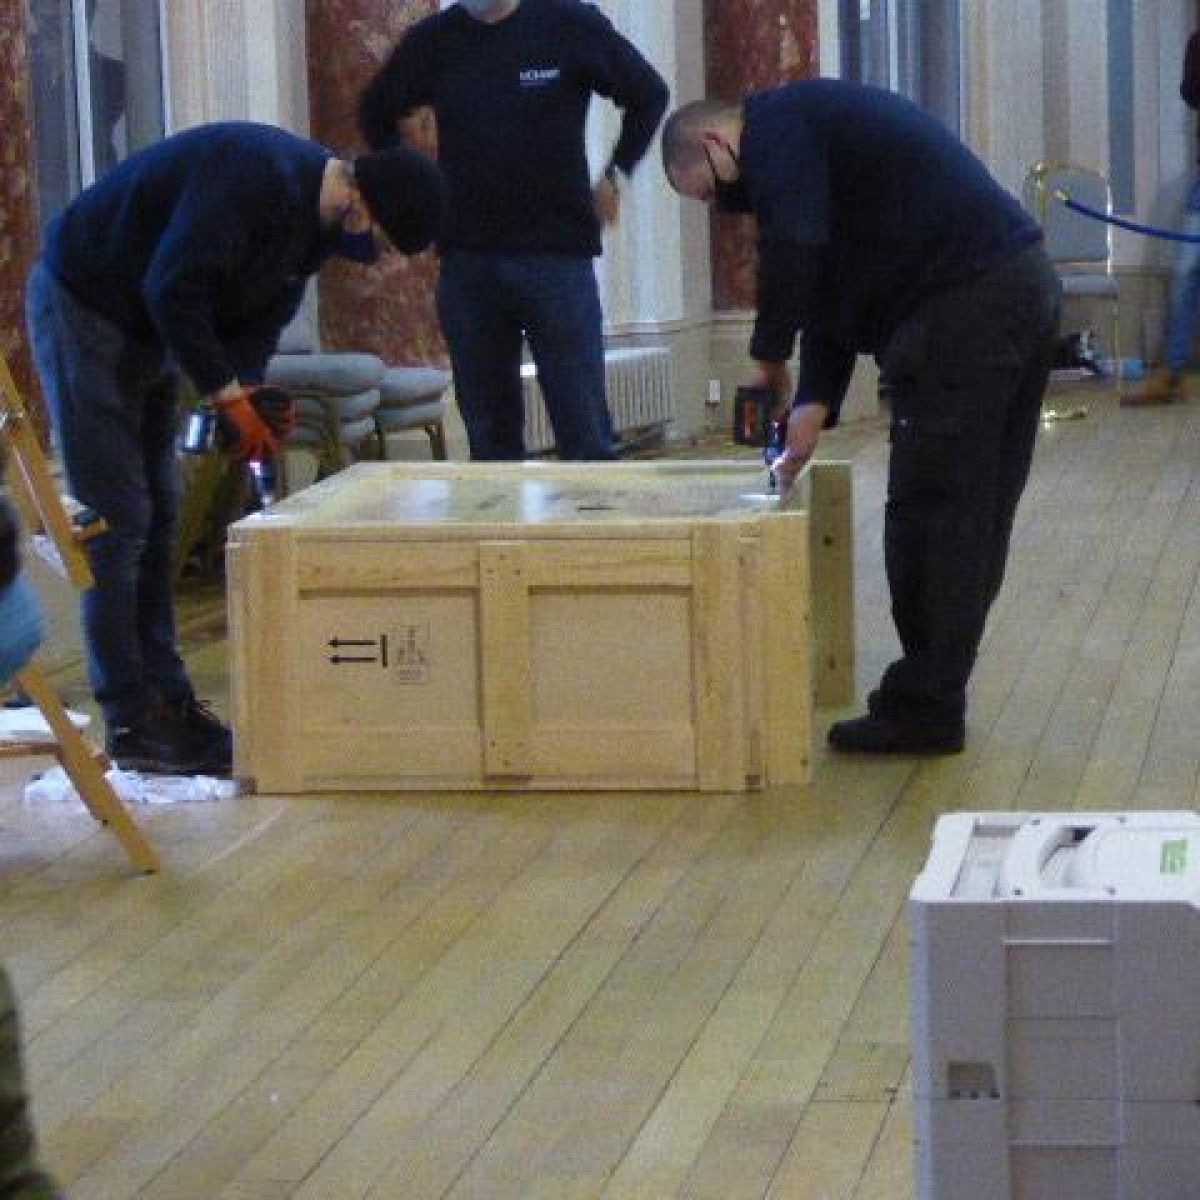 Finishing Touches To Secure The Crate